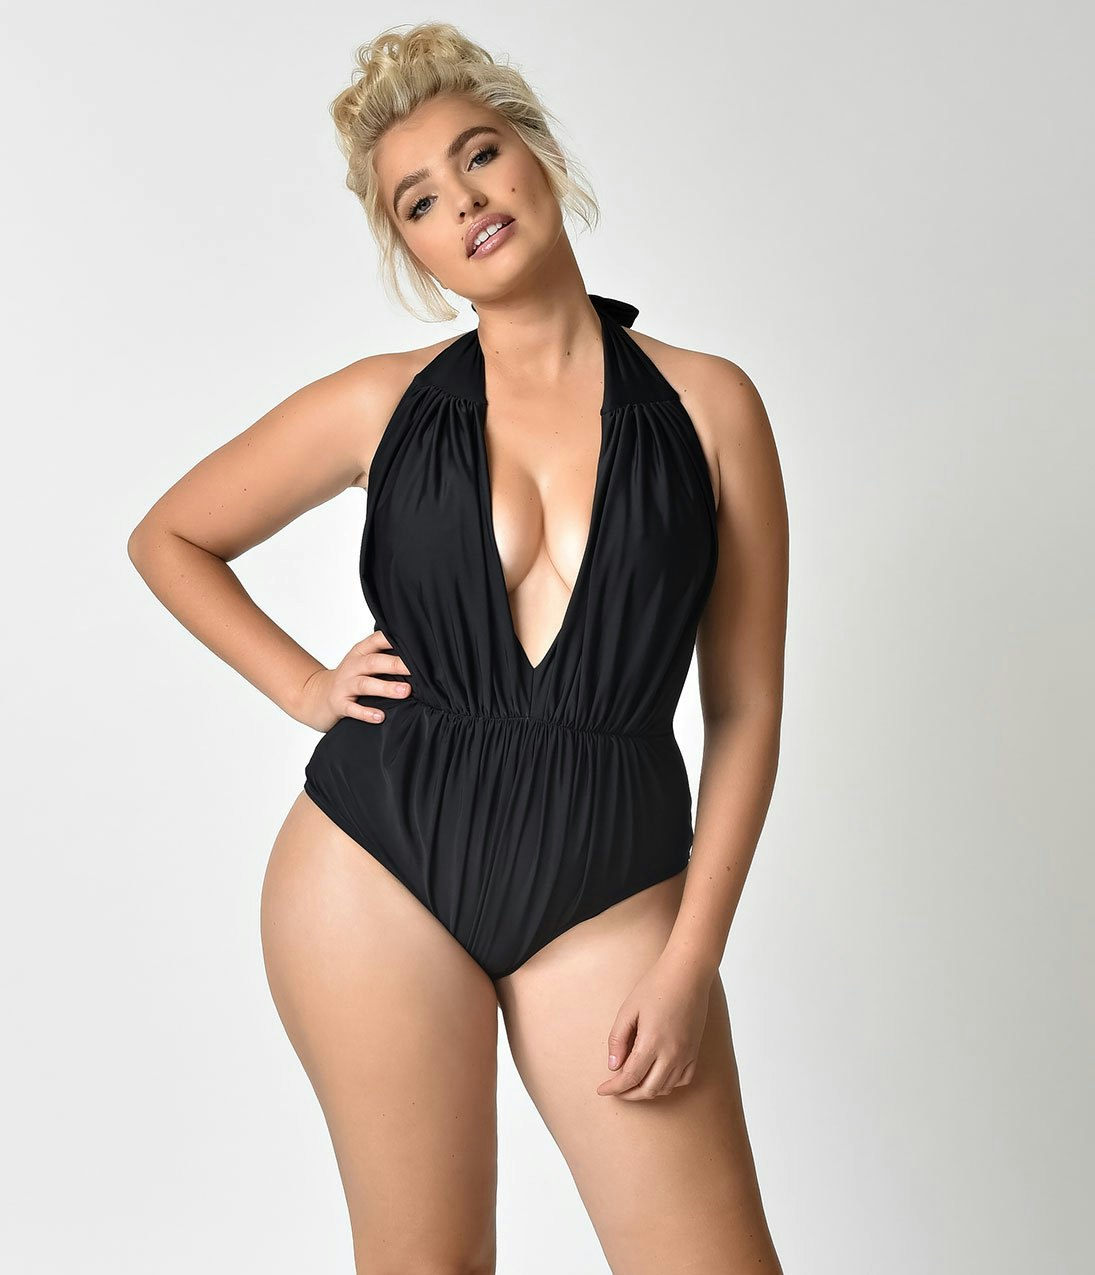 plus size swimsuits for seniors